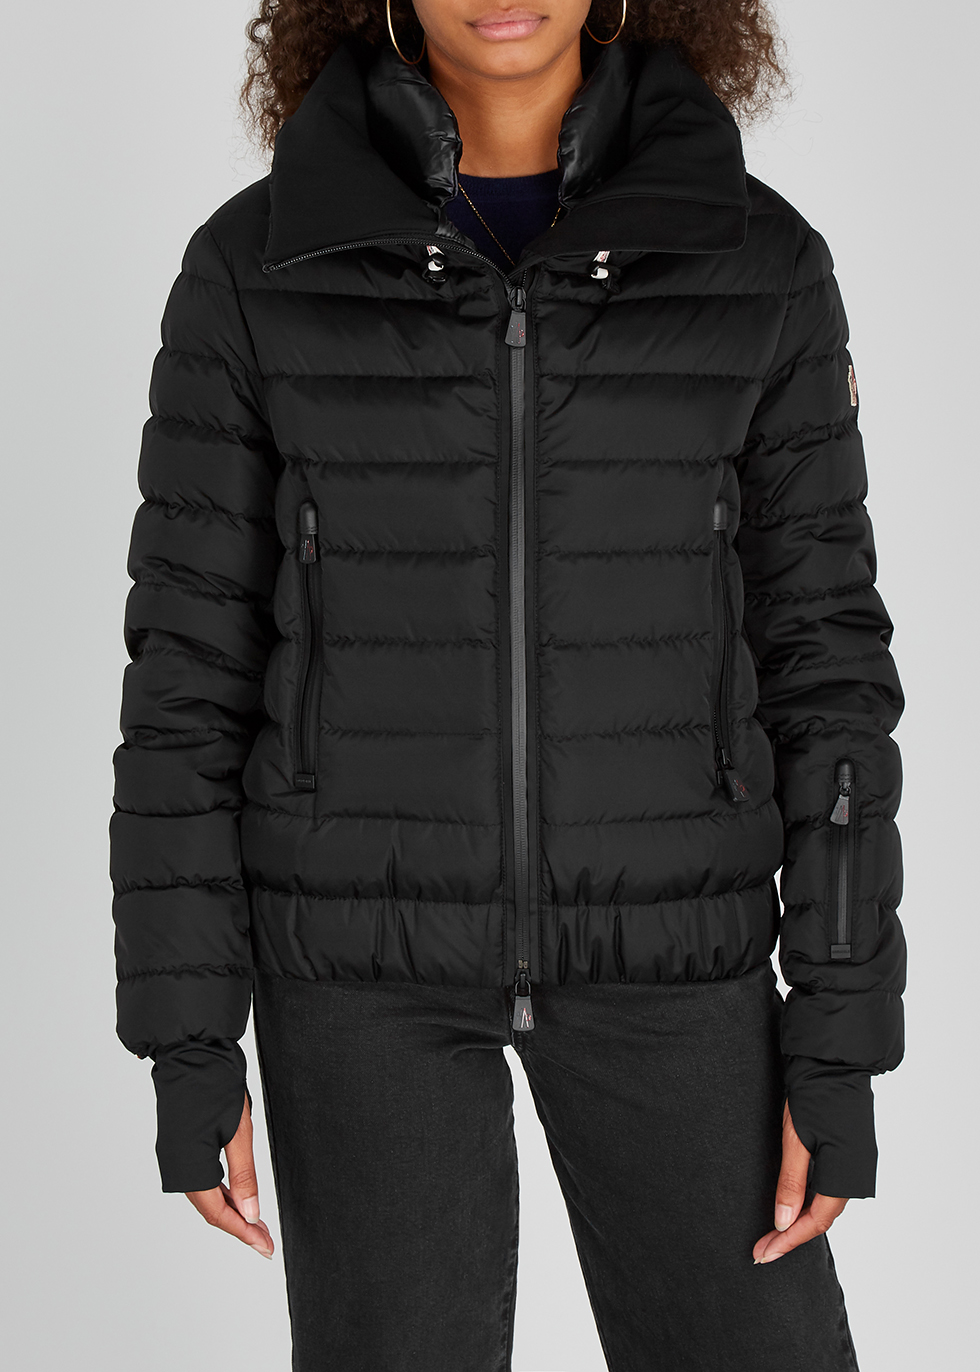 black quilted shell jacket - Harvey Nichols